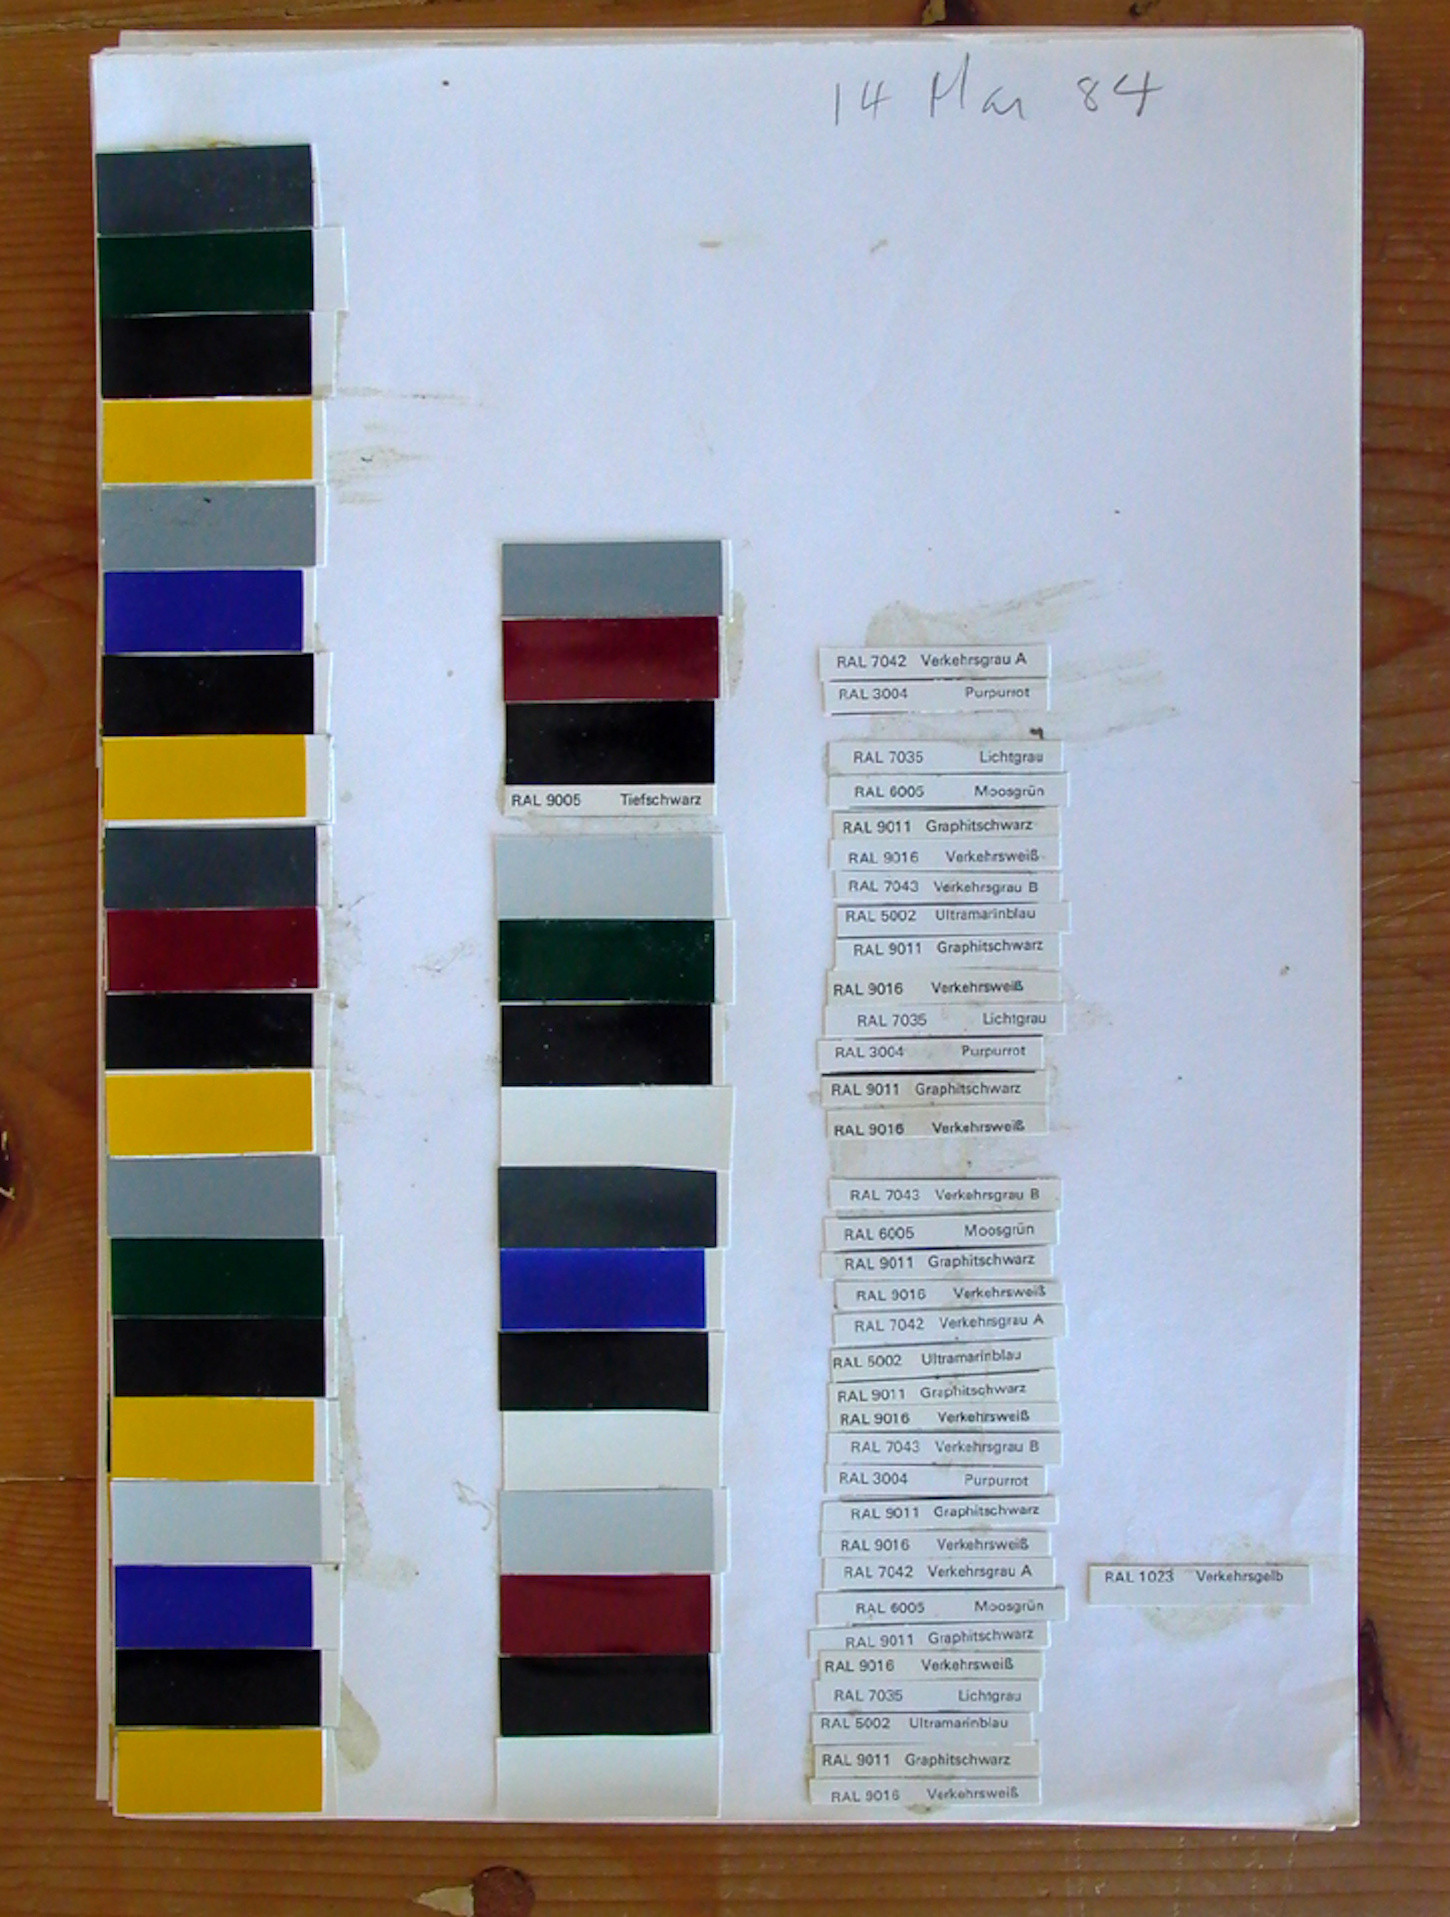 Donald Judd. _Untitled_. 1984. Color samples from RAL chart and pencil on paper. Sheet: 13 1/4 × 9 3/8" (33.7 × 23.8 cm). Judd Foundation. © 2020 Judd Foundation / Artists Rights Society (ARS), New York